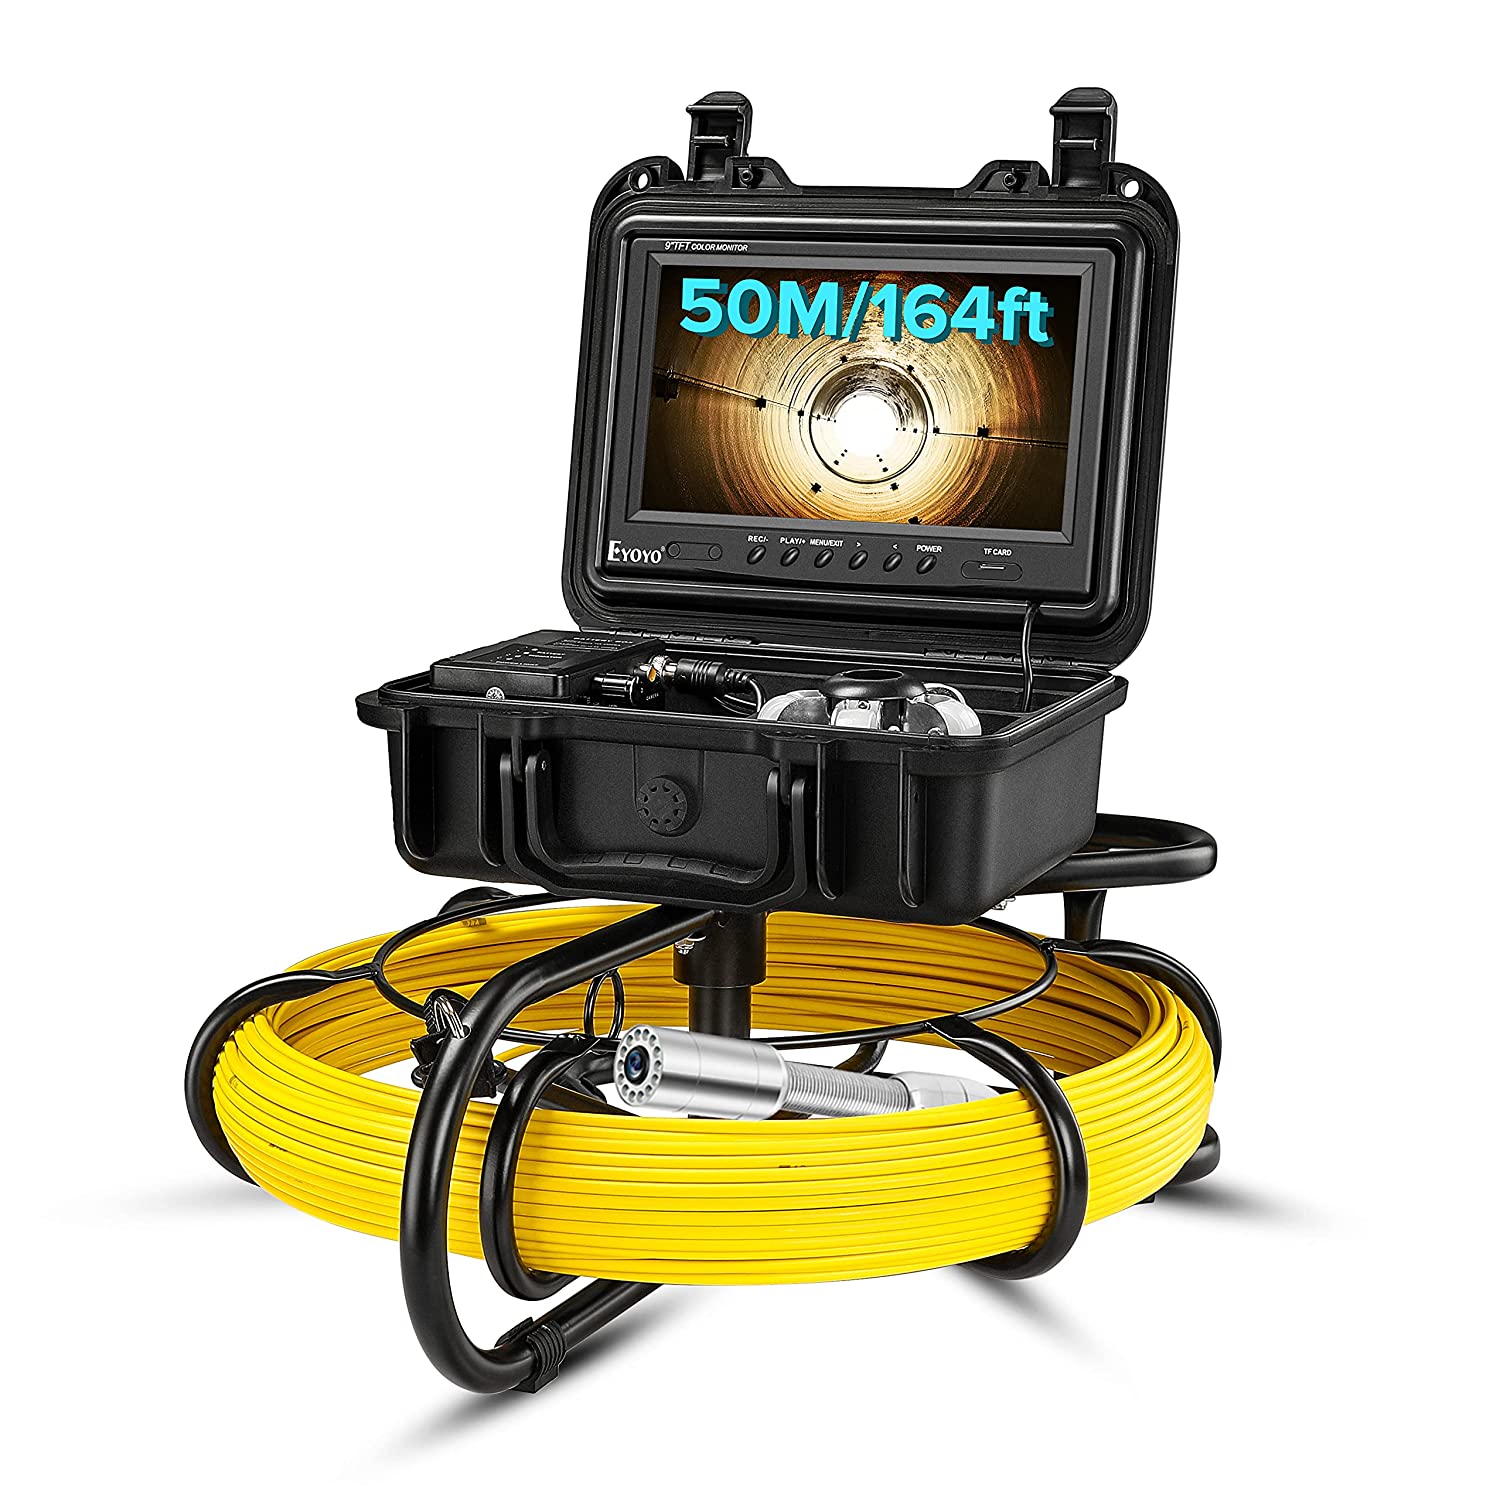 Upgraded 164ft/50m Sewer Camera, 23mm HD 720P Camera with 12pcs LED, 9 LCD  Monitor with DVR, Fiberglass Cable, Rechargeable Battery, 8GB TF Card,  Drain Pipe Video Inspection Plumbing Endoscope Camera,Pipe Inspection Camera